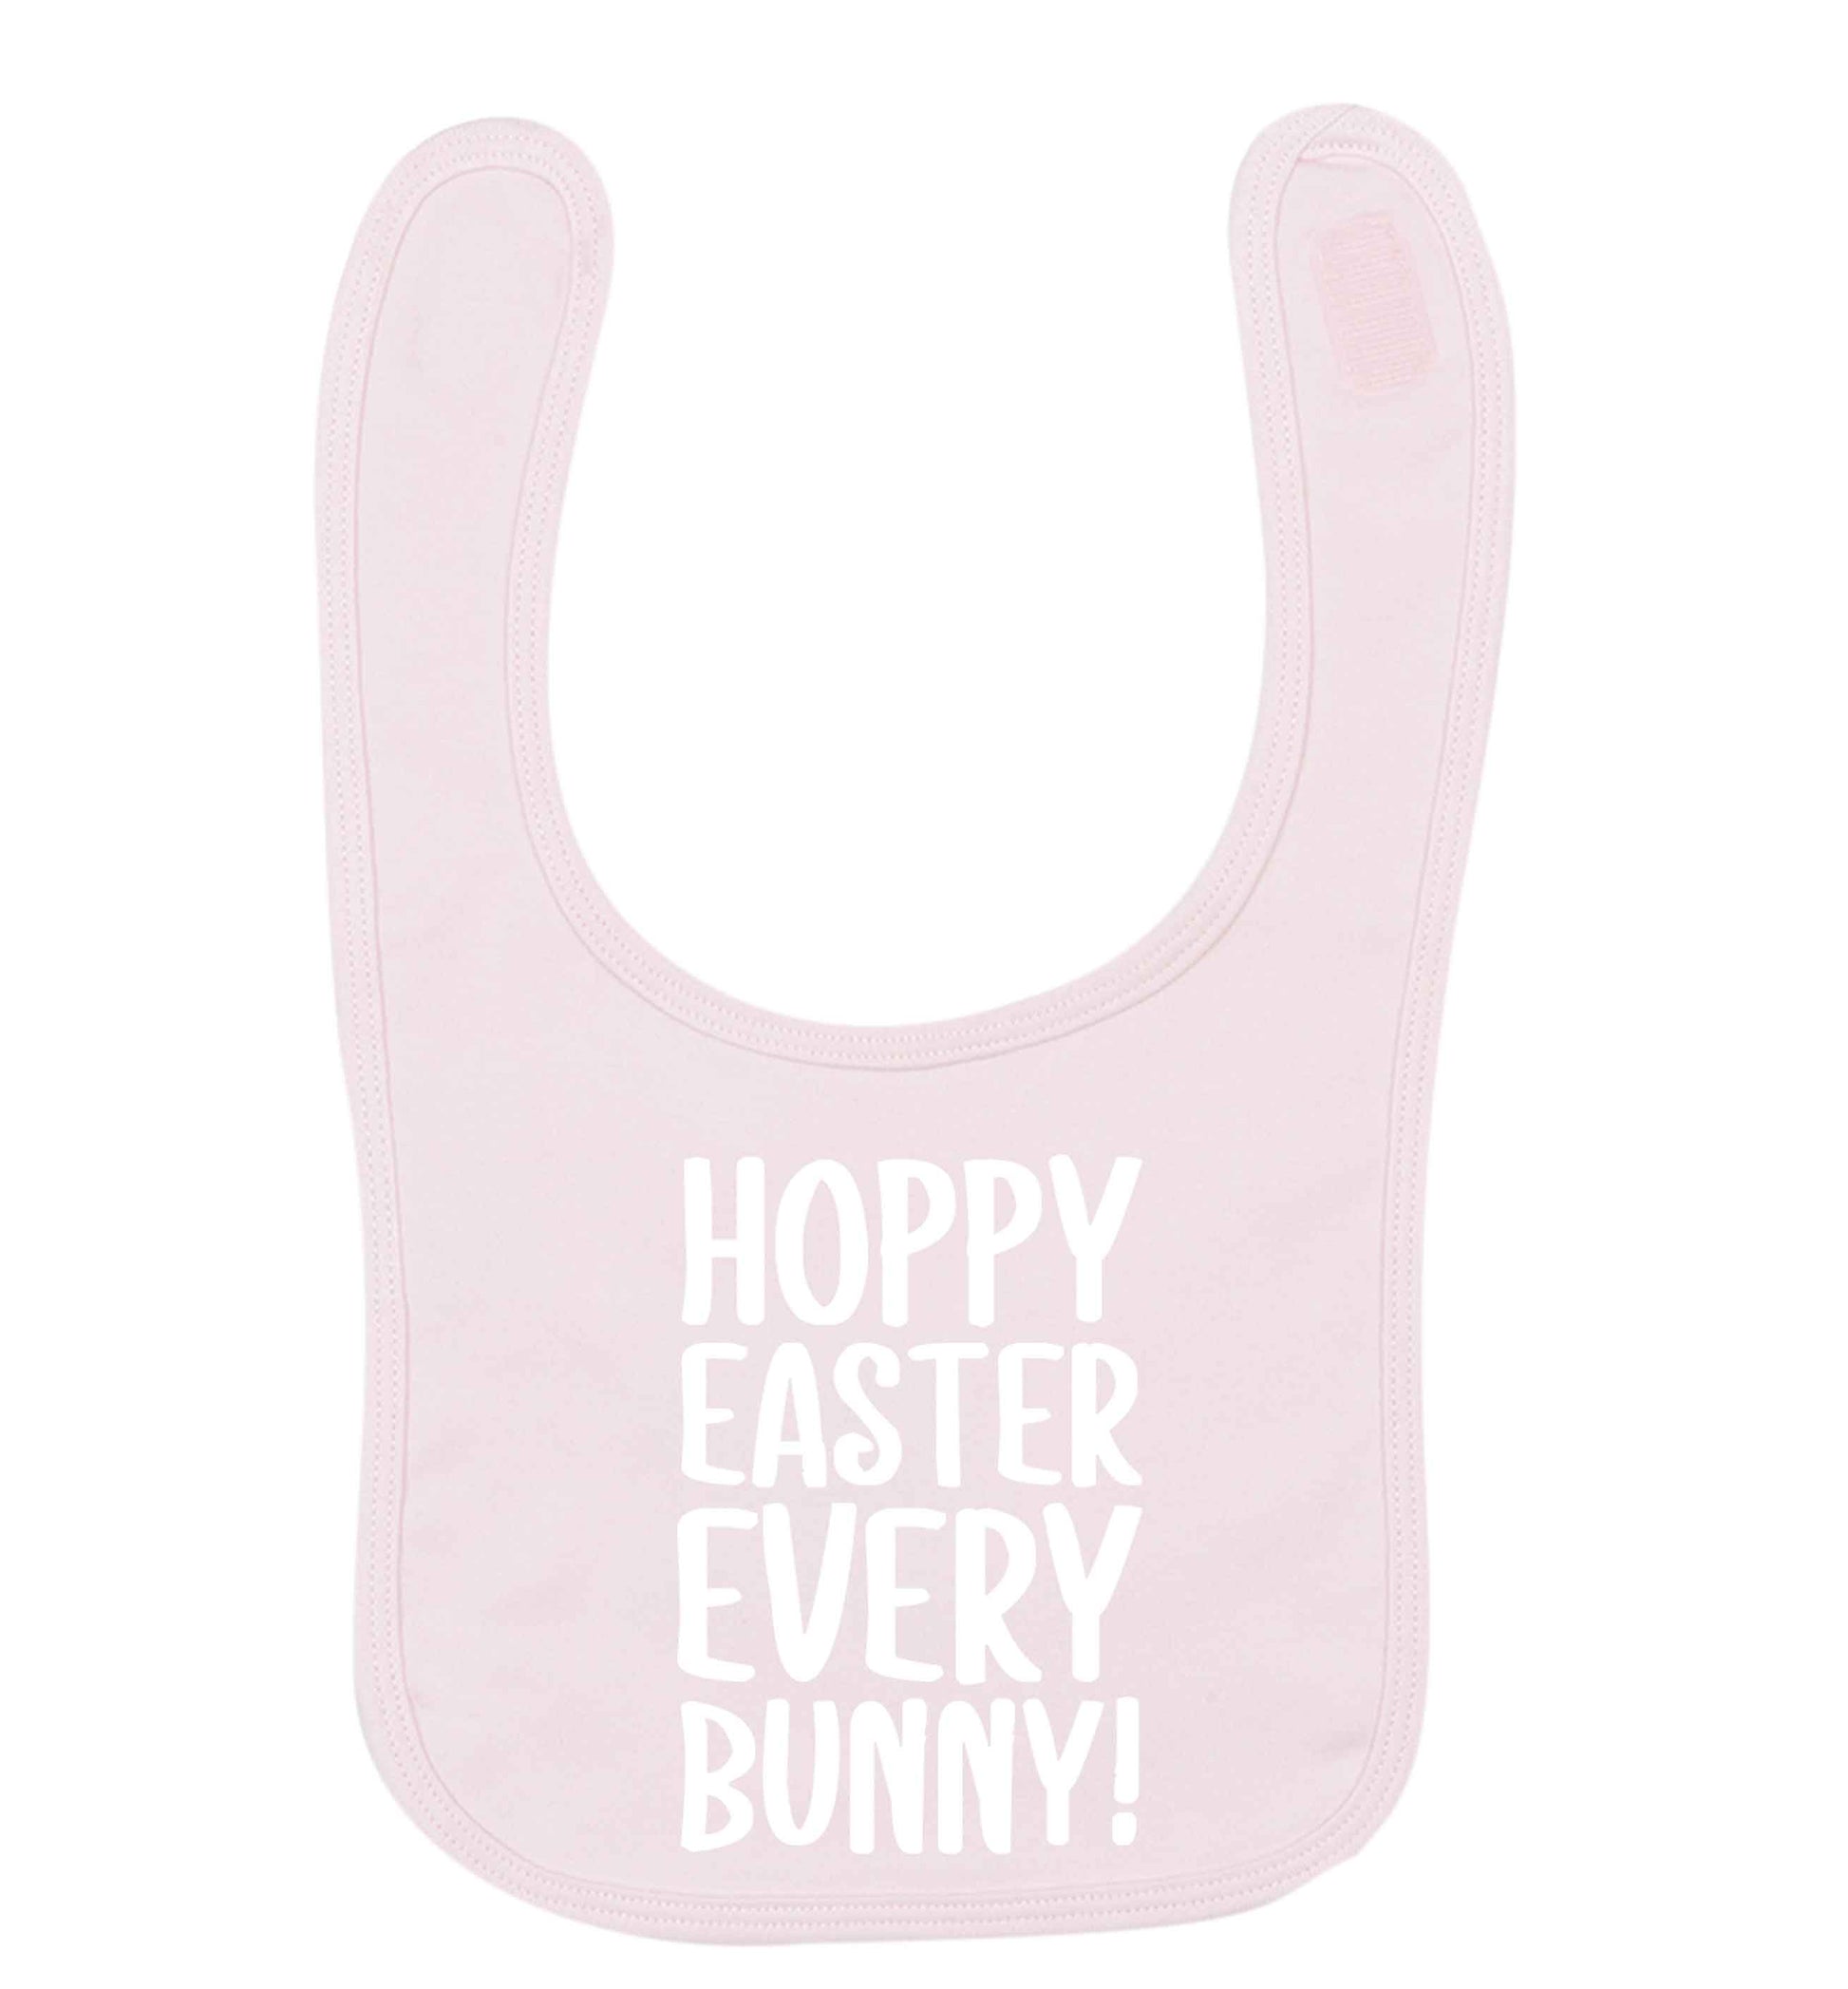 Hoppy Easter every bunny! pale pink baby bib